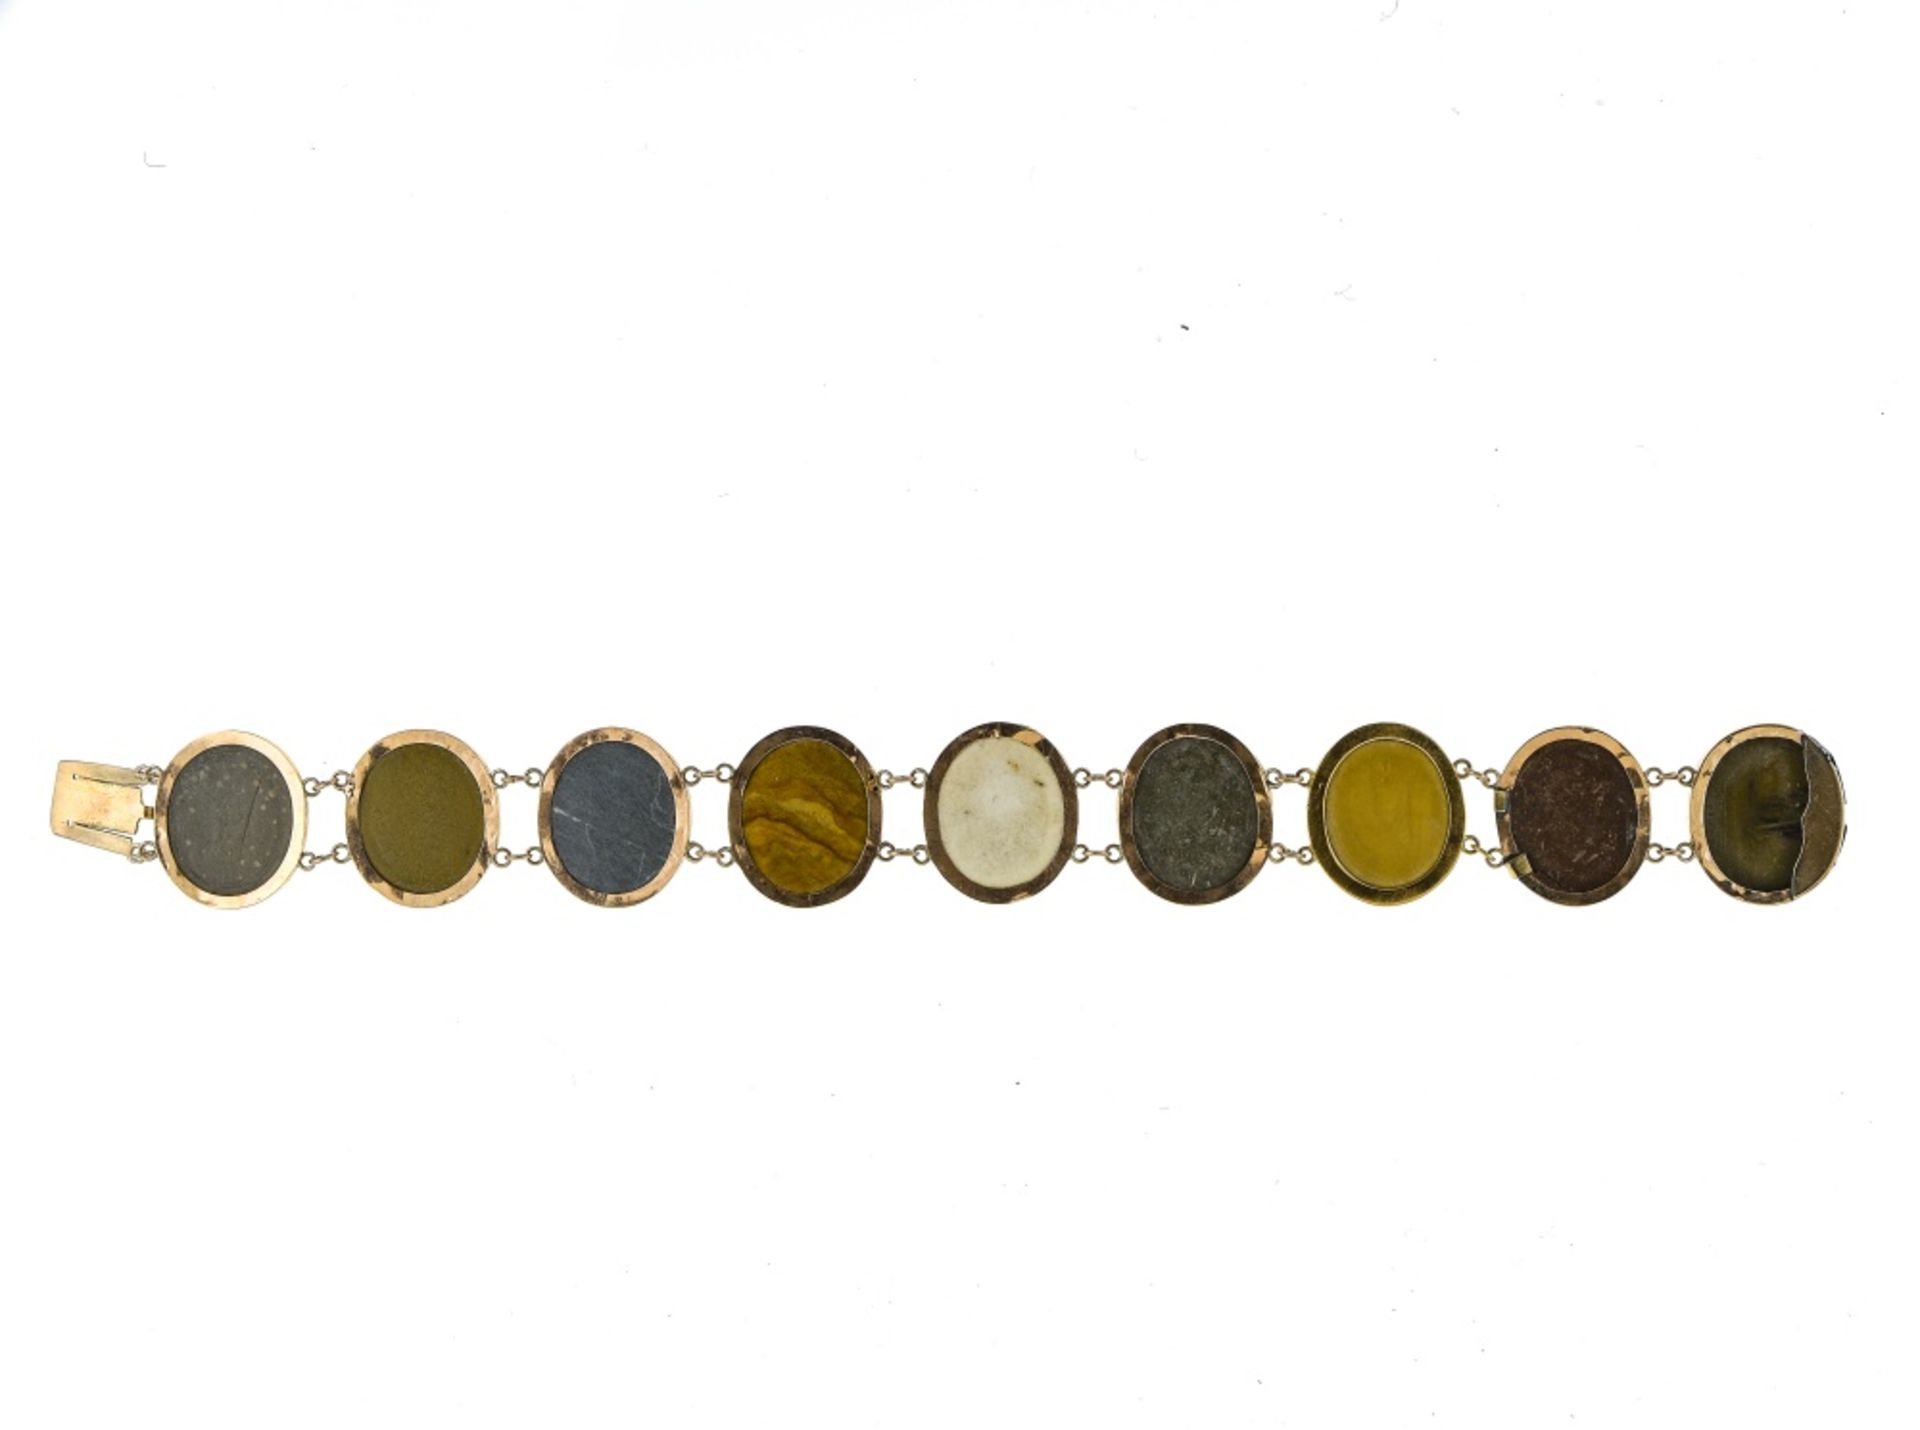 Lava stone bracelet 18 kt yellow gold, composed of 9 medallions set with lava stone cameos of - Image 3 of 3